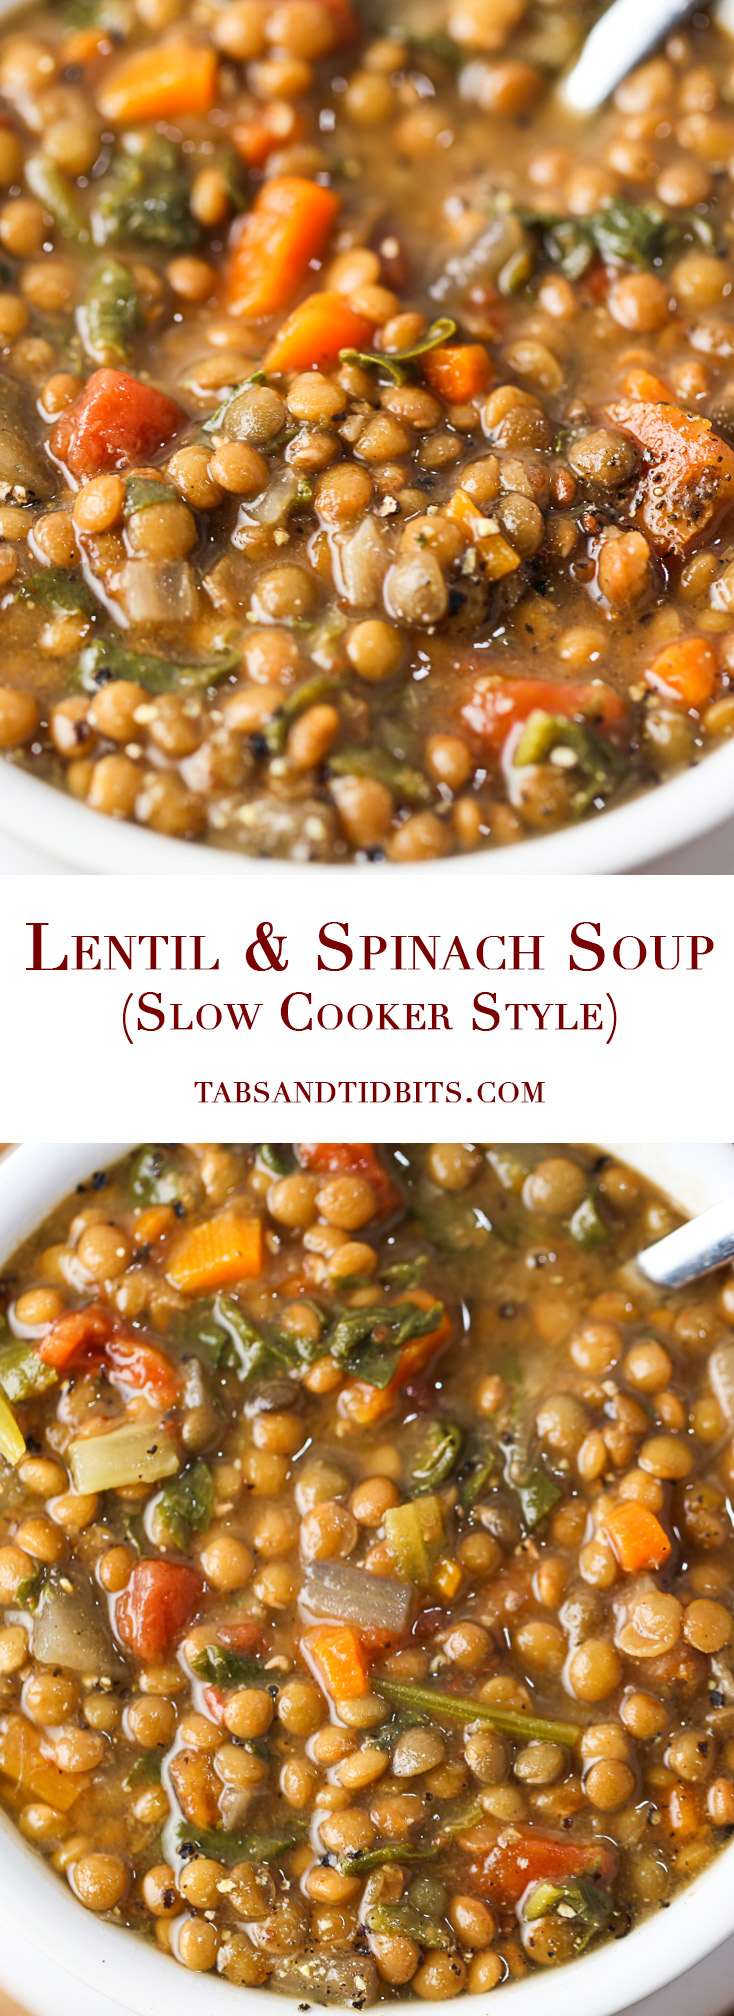 Lentil & Spinach Soup (Slow Cooker Style) - A delicious, nutritious and filling soup with the optional but strongly recommended kick of spice! 